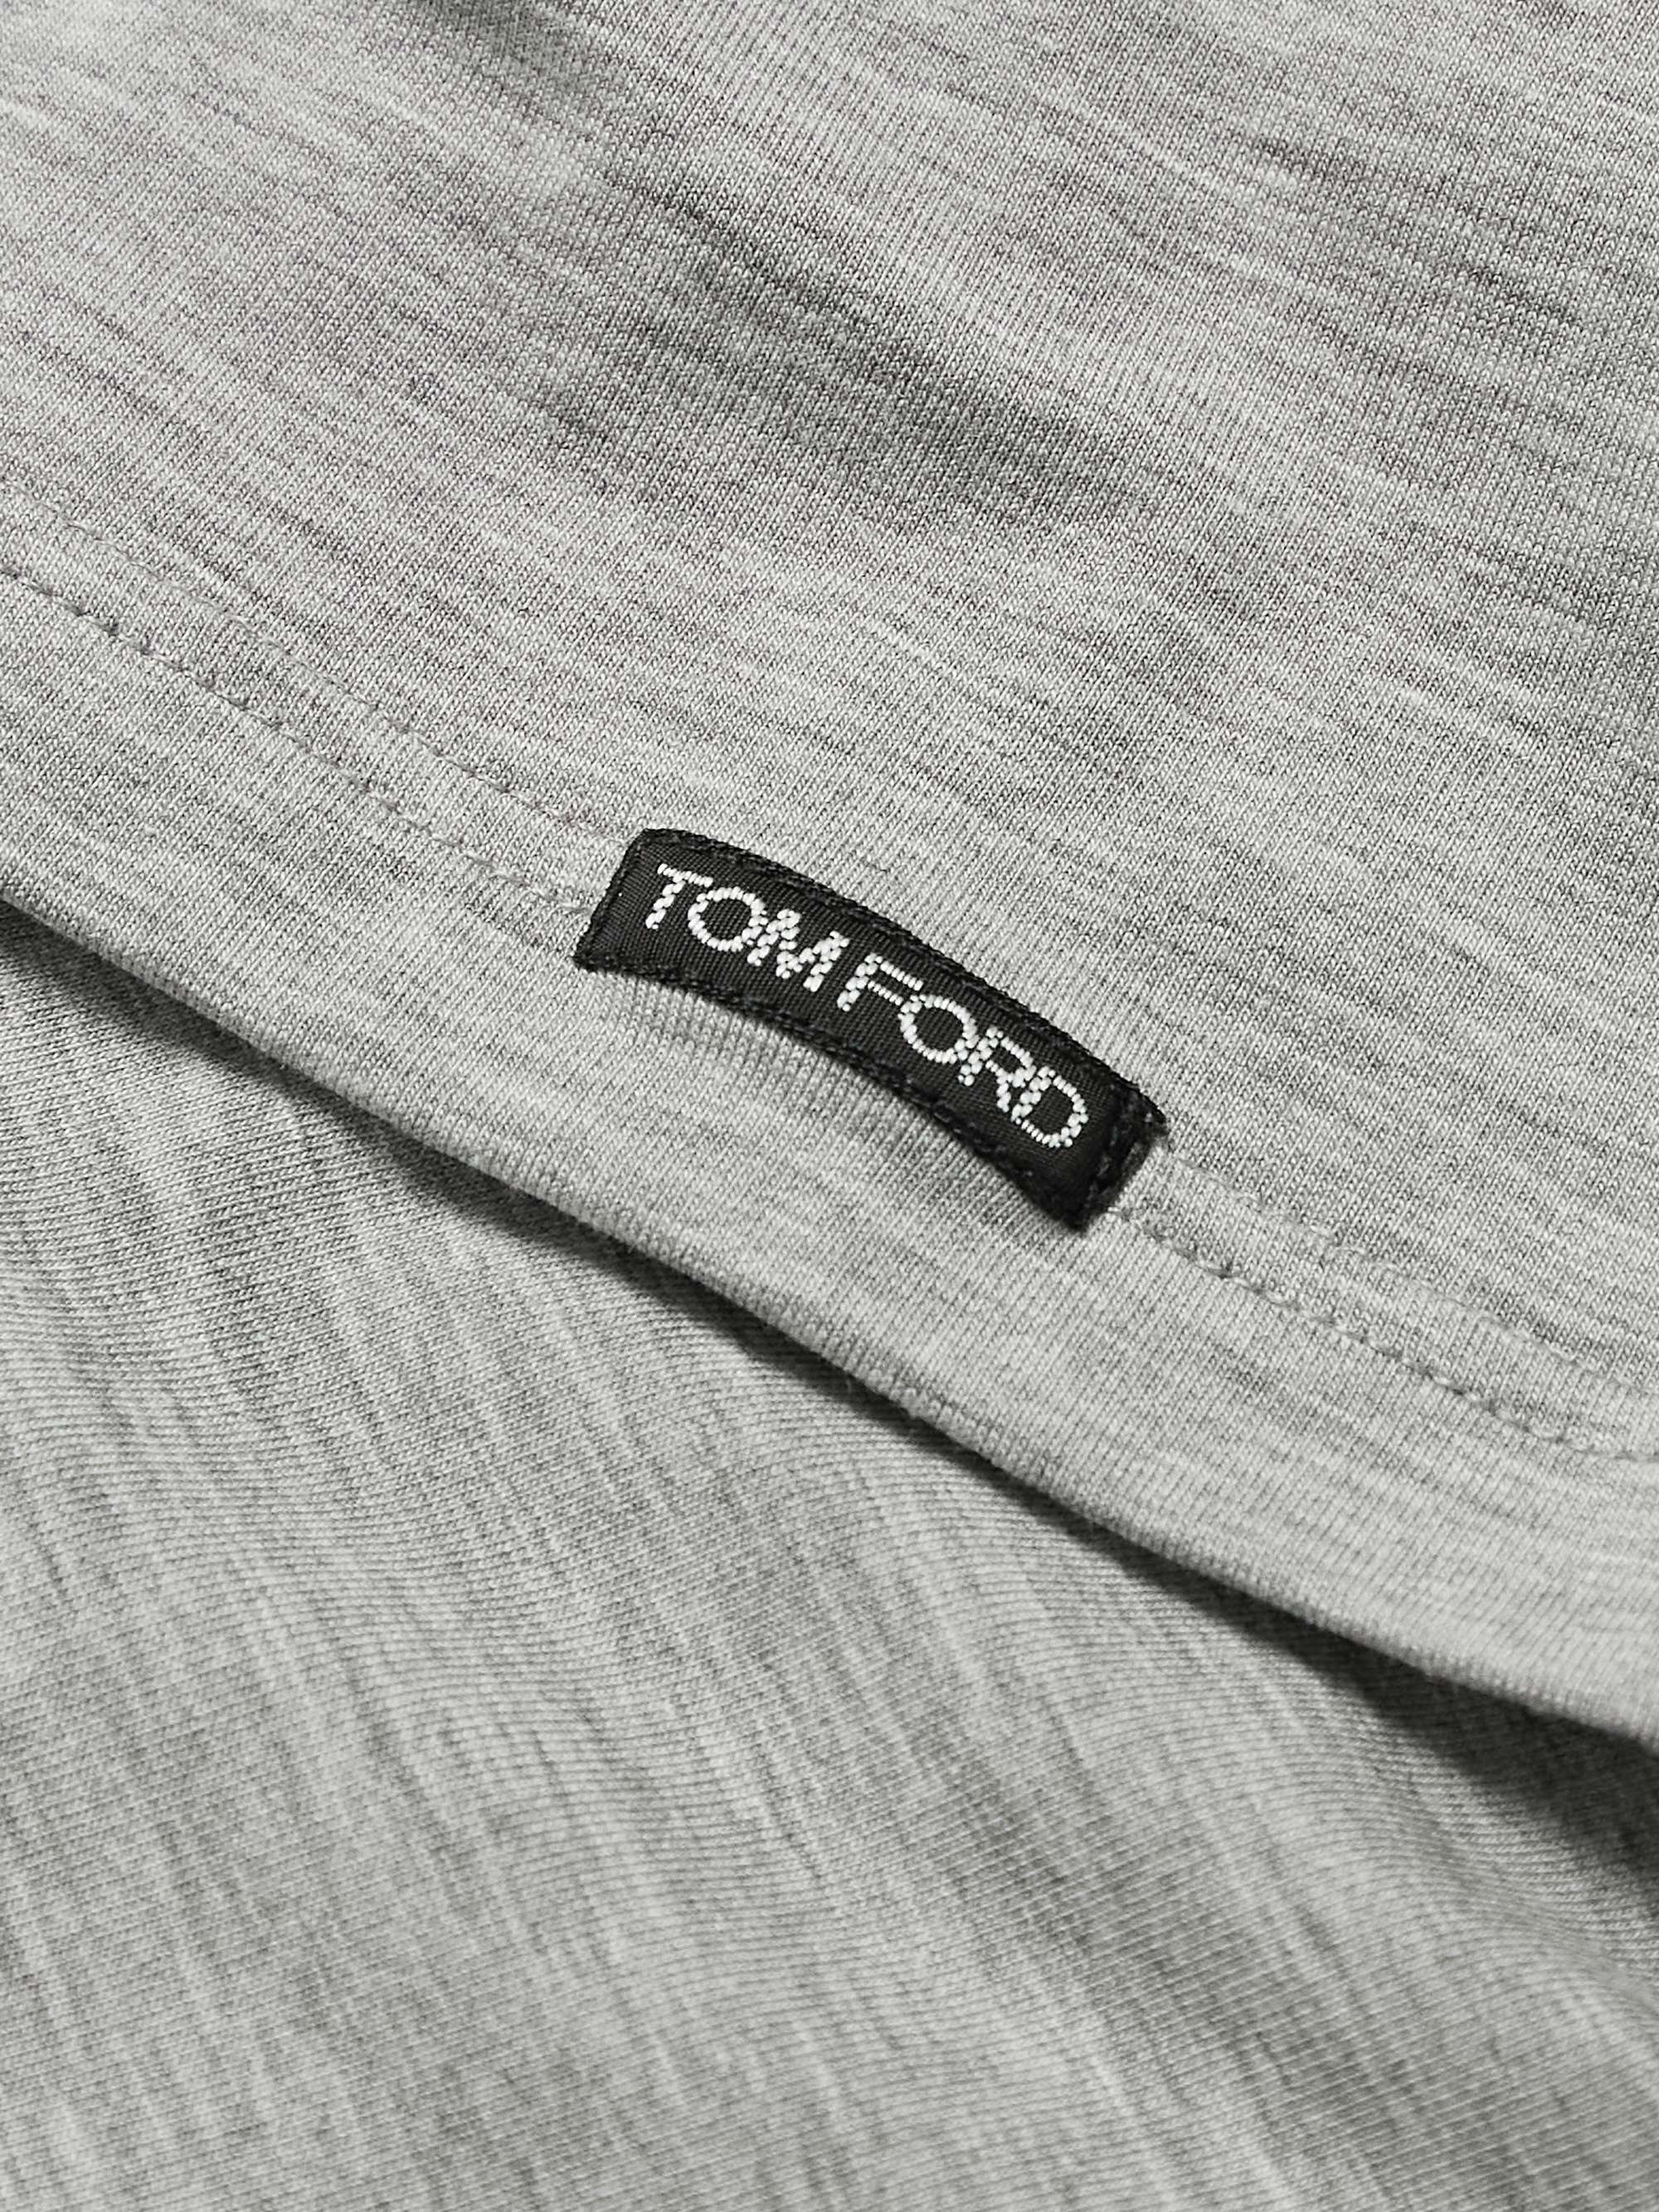 TOM FORD Stretch Cotton and Modal-Blend T-Shirt